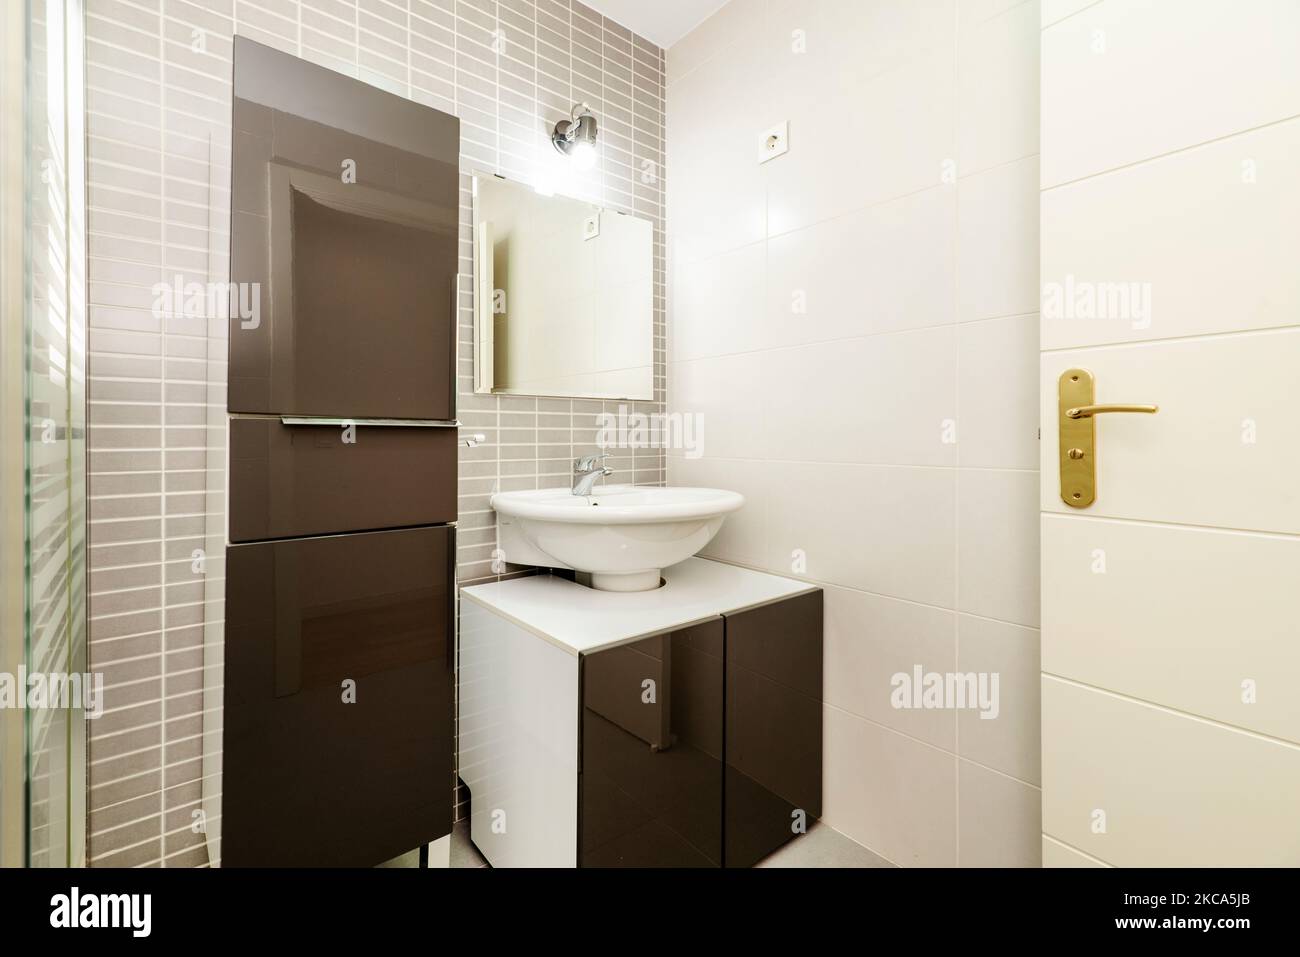 Toilet with small white chest of drawers with brown doors with frameless square mirror and matching column cabinet Stock Photo